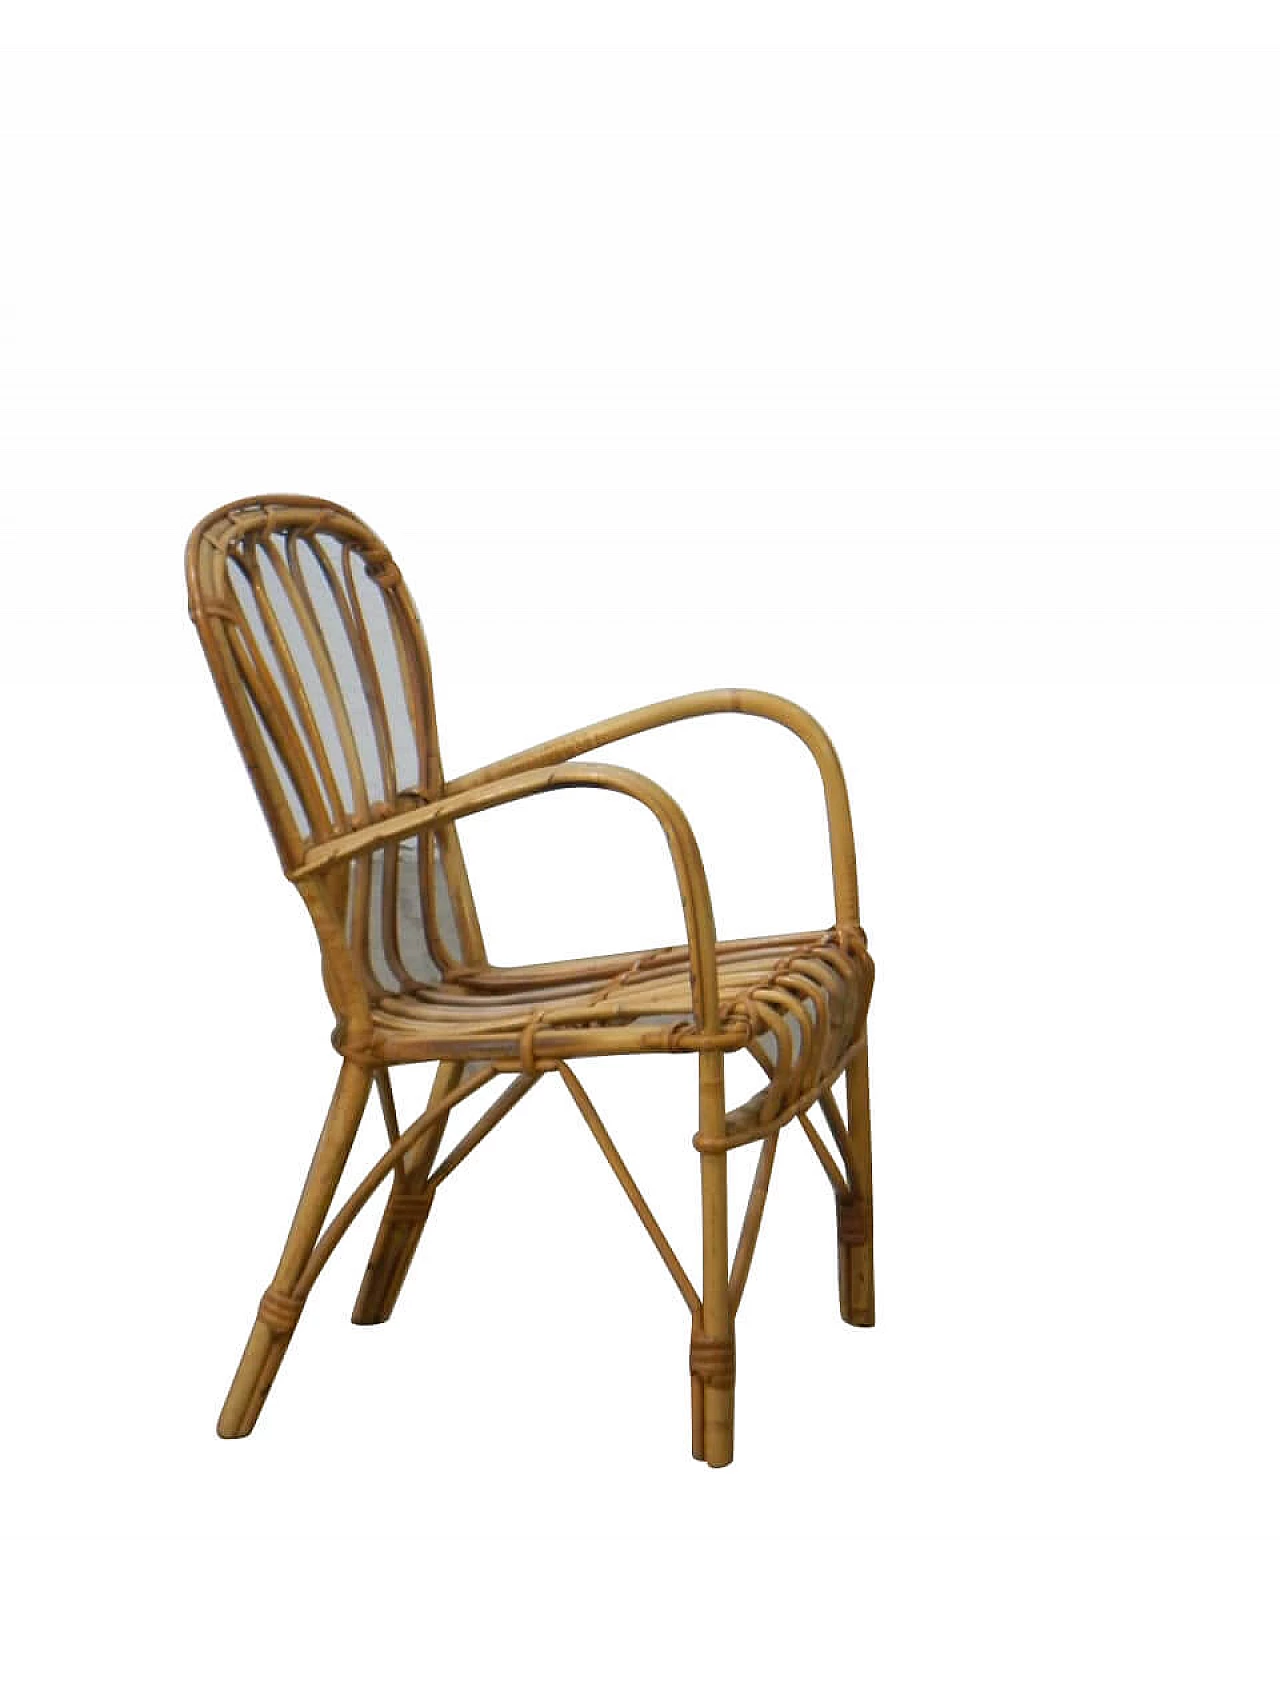 Wicker chair for child, 70s 1064310